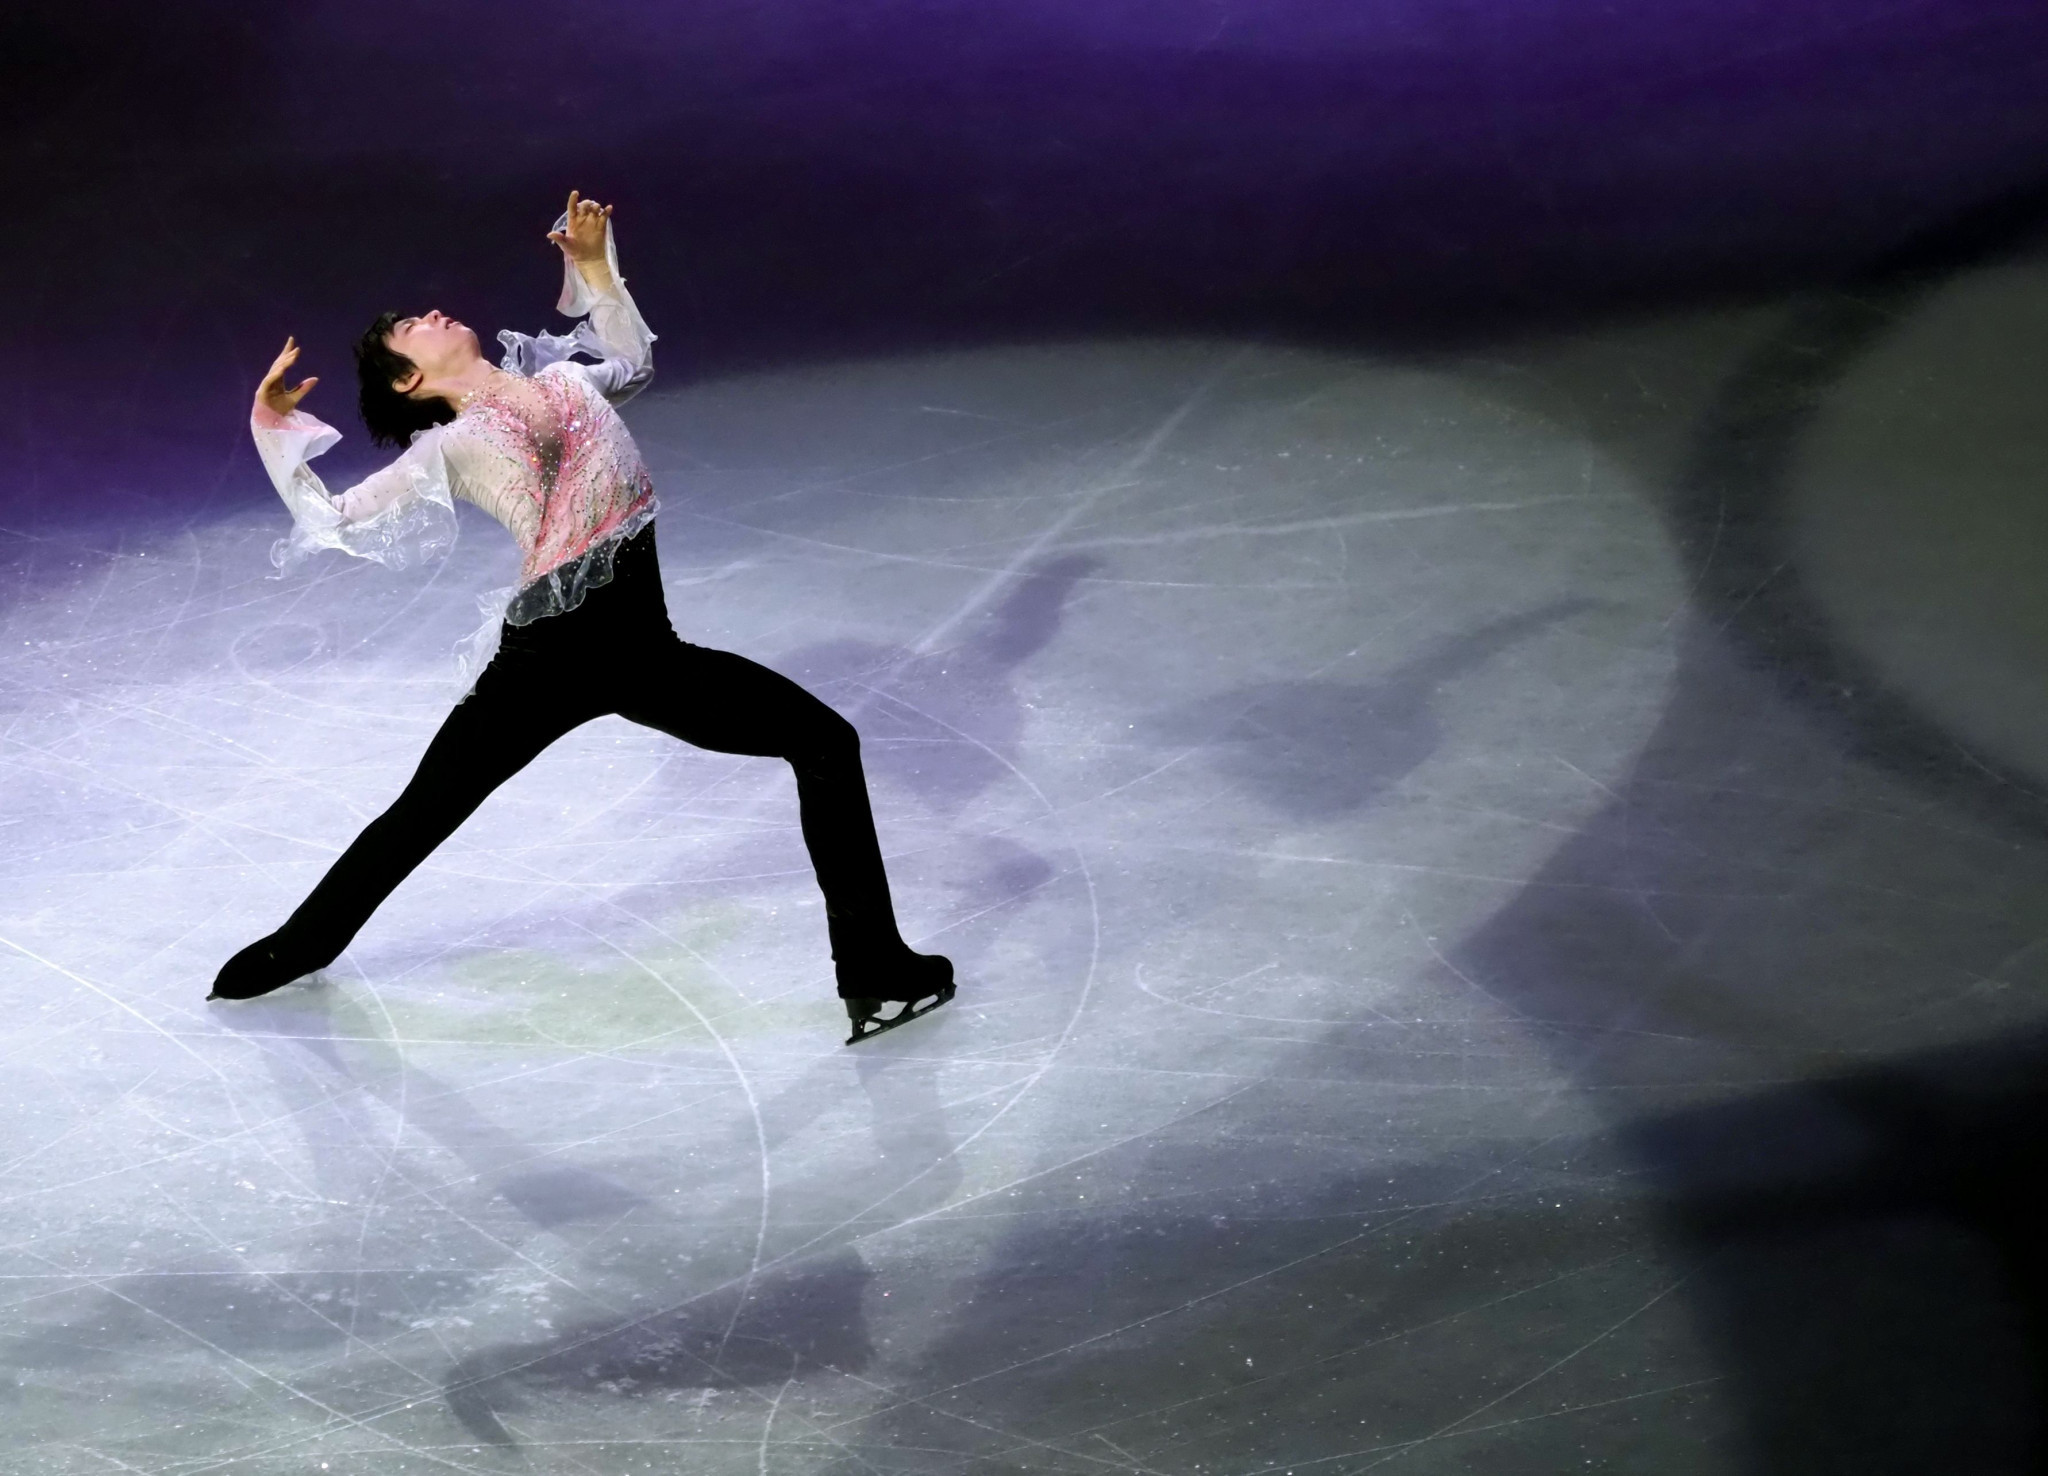 Double Olympic gold medallist, Japan's Yuzuru Hanyu, opens his campaign a week later than Chen at Skate Canada ©Getty Images